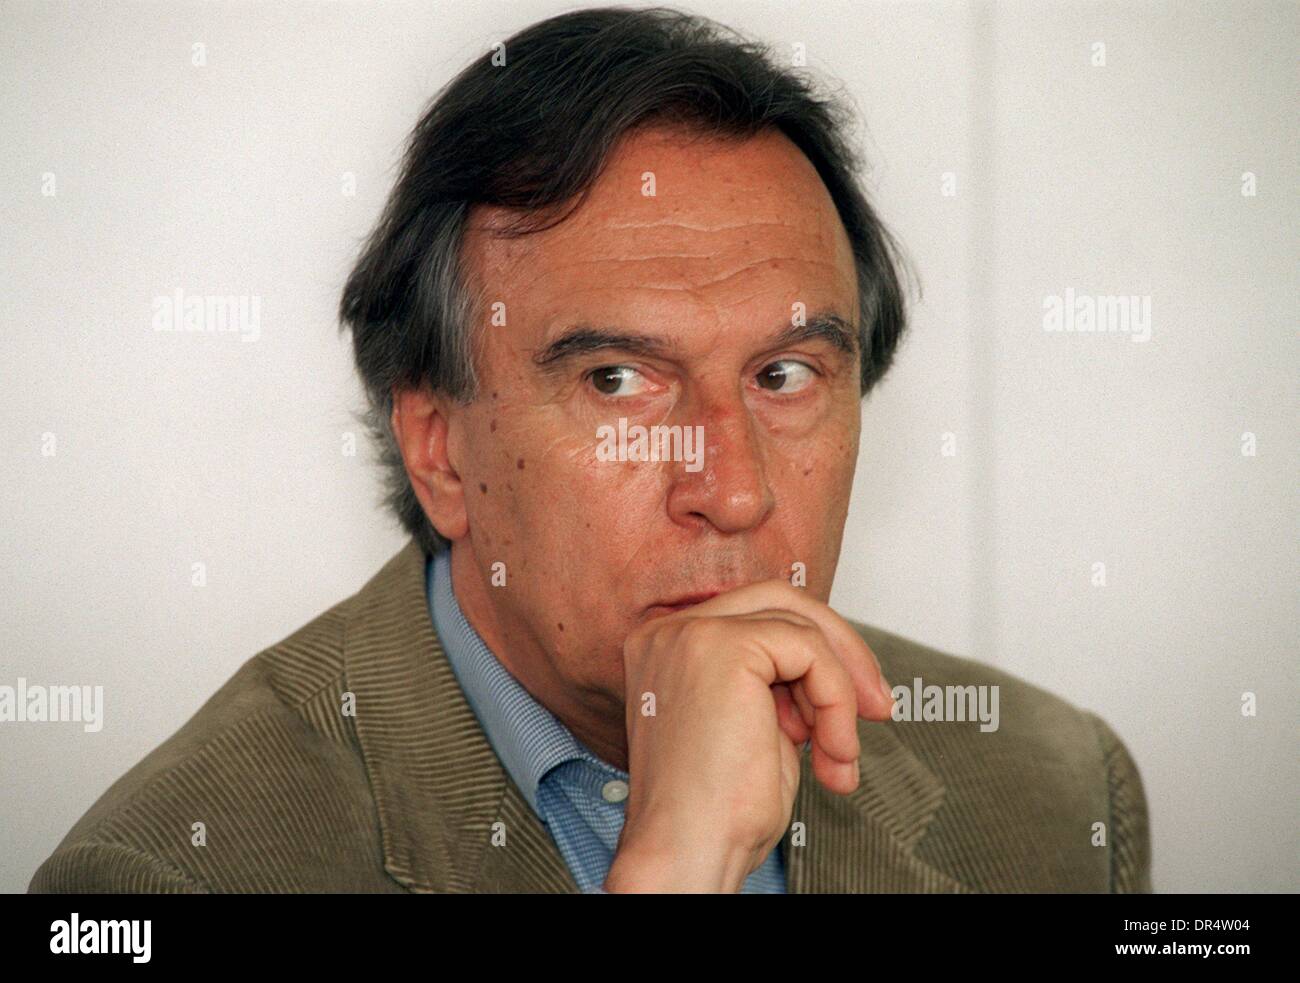 (dpa files) - Italian conductor Claudio Abbado pictured during a press conference in Berlin, 27 April 1998. Abbado was born in Milan, Italy, on 26 June 1933. He studied piano at the conservatory in Milan before beginning to conduct in Vienna. In 1960 he made his debut at La Scala in his native Milan in 1960 and served as music director there from 1968 to 1986. In 1989 he succeeded H. von Karajan as permanent conductor and artistic director of the Berlin Philharmonic, a post he held until September 2002. Stock Photo